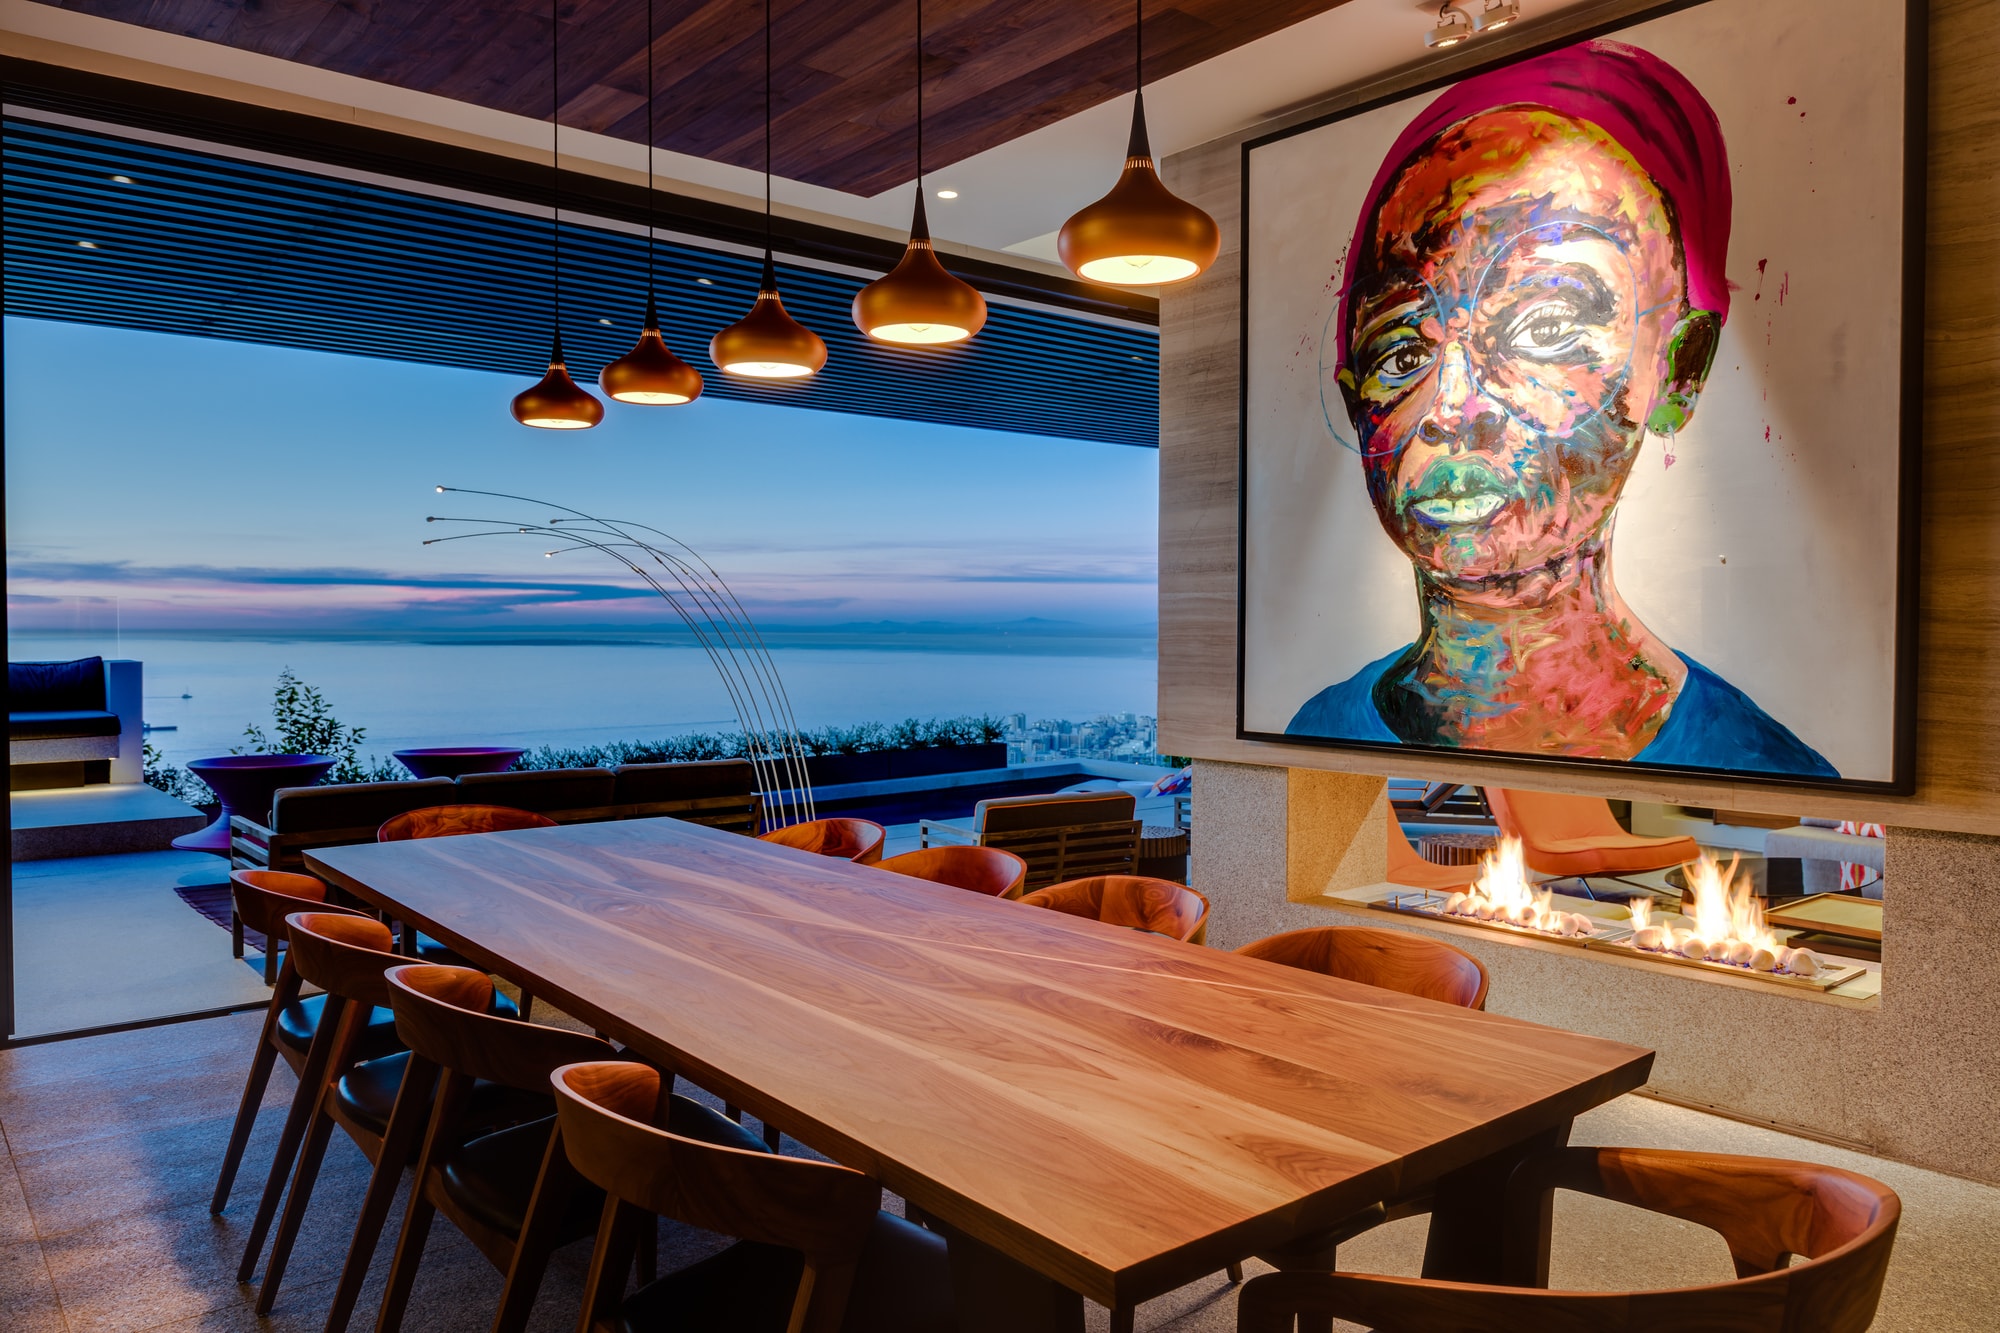 Sealion dining room with view of ocean skyline